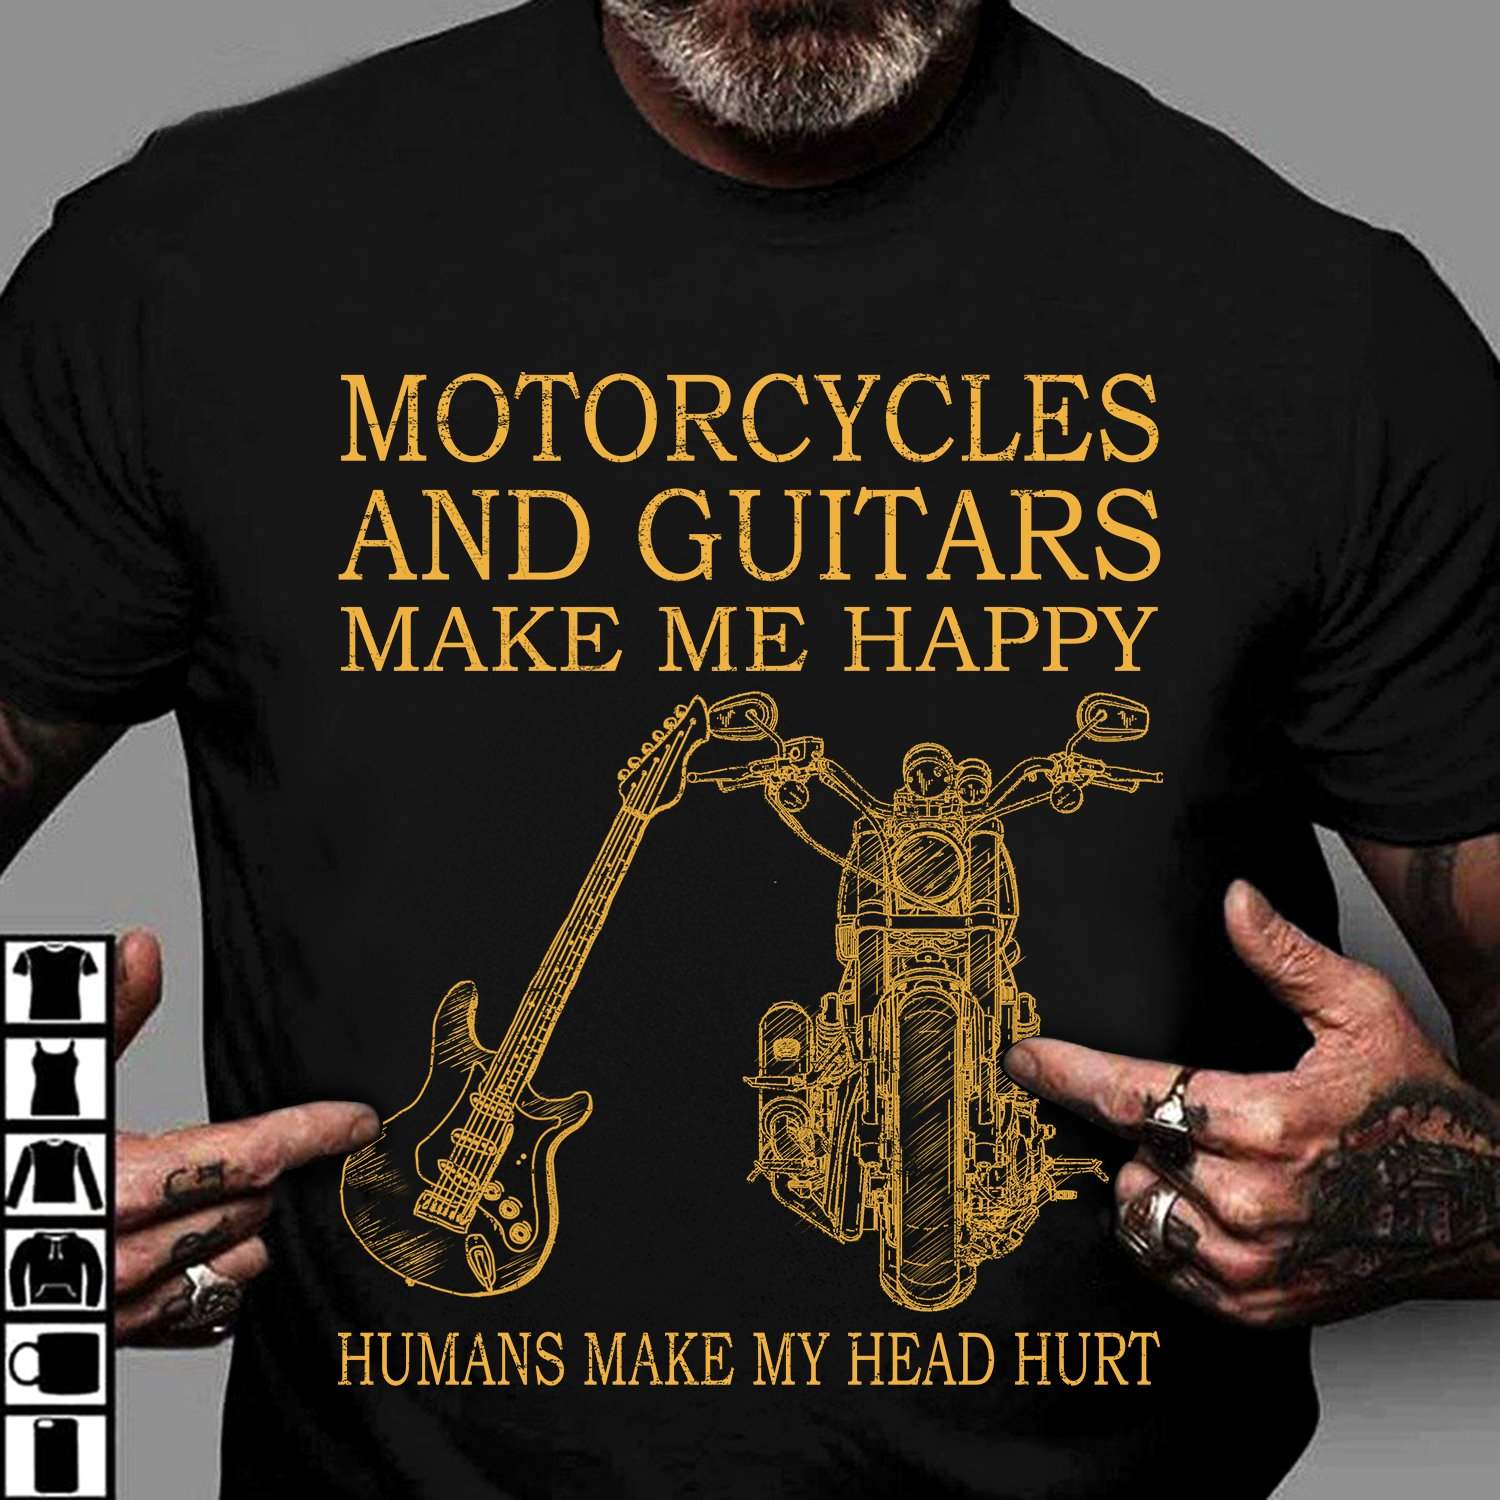 Motorcycles and guitars make me happy humans make my head hurt - The guitarist